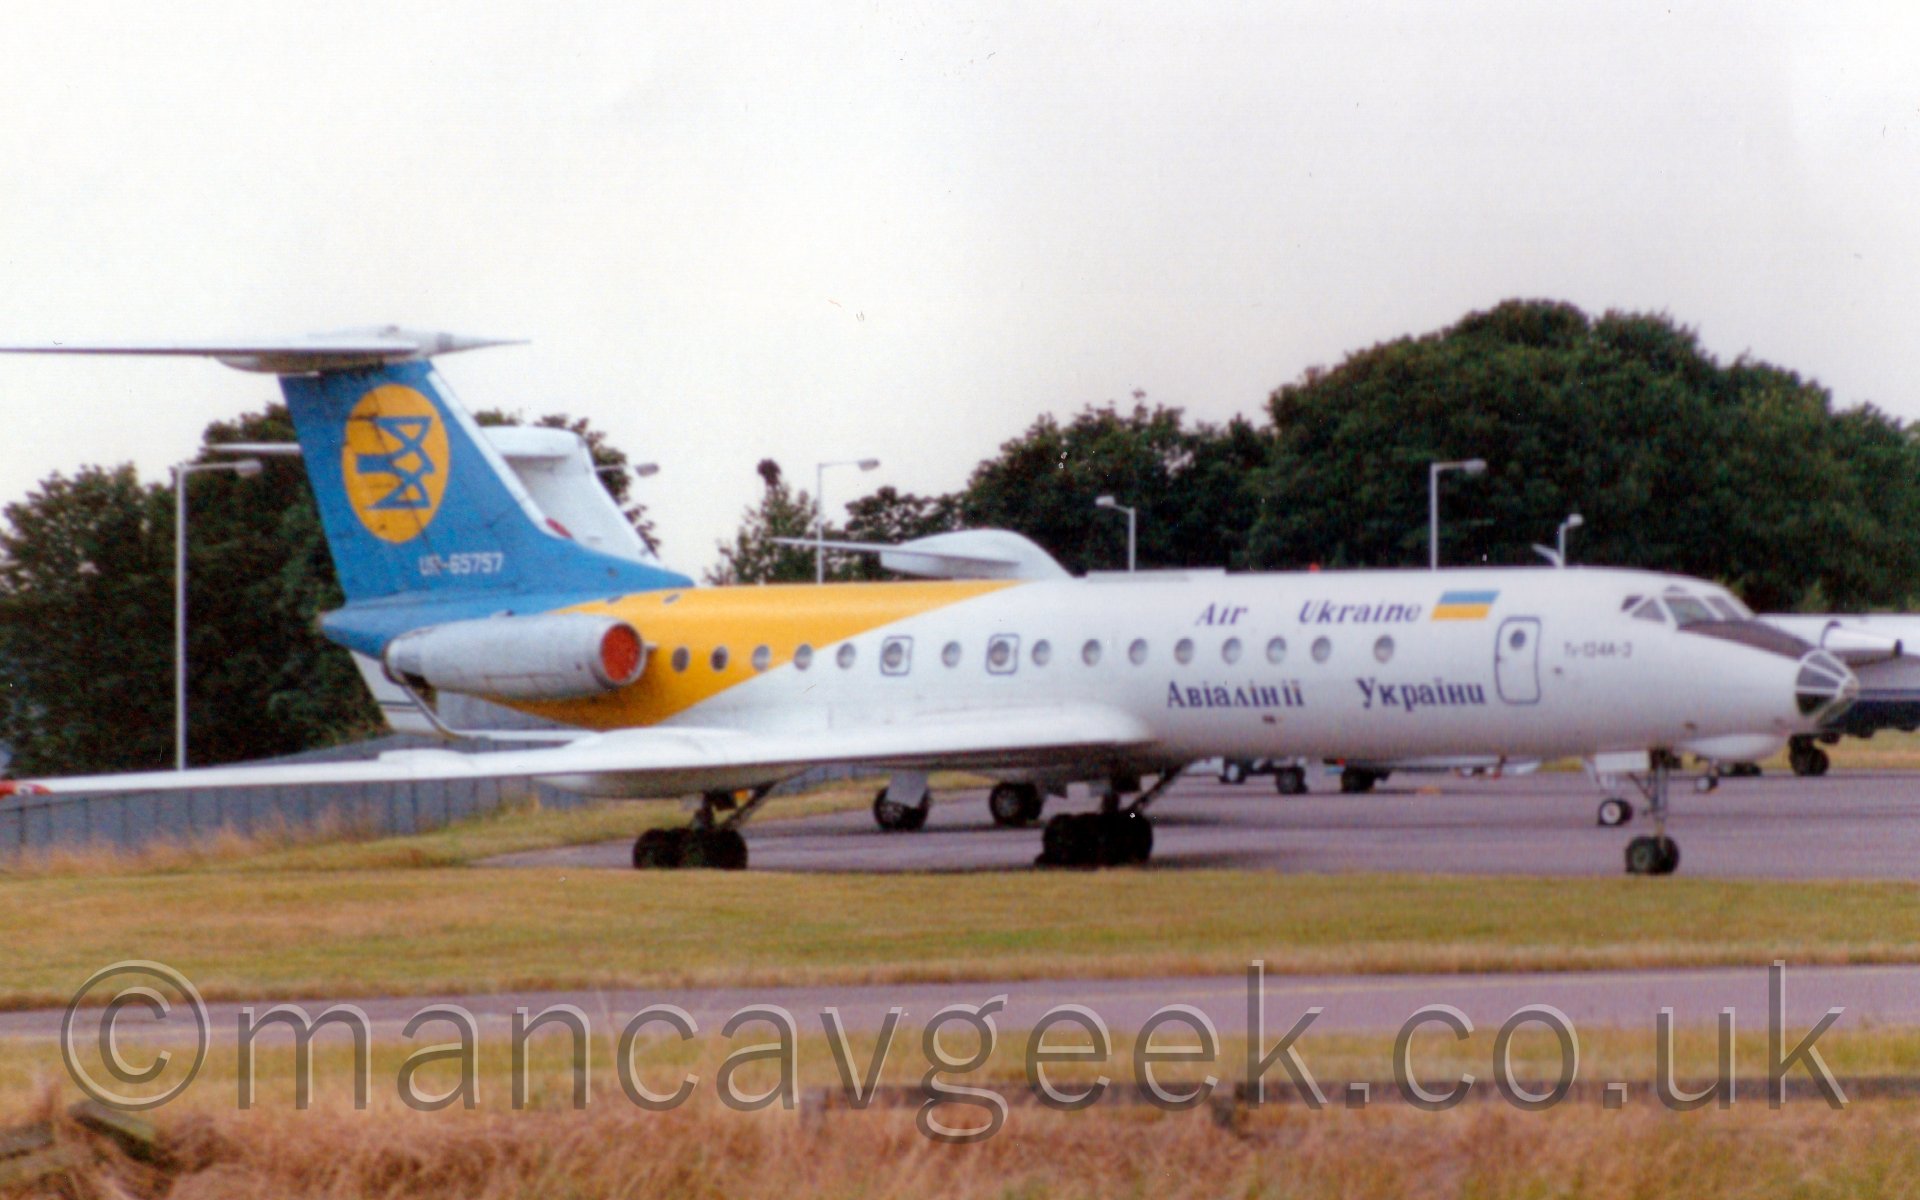 Side view of a white, yellow, and blue, twin engined jet airliner with the engines mounted on the rear fuselage, on the bizjet apron at Luton Airport, some time in the late 1990's.